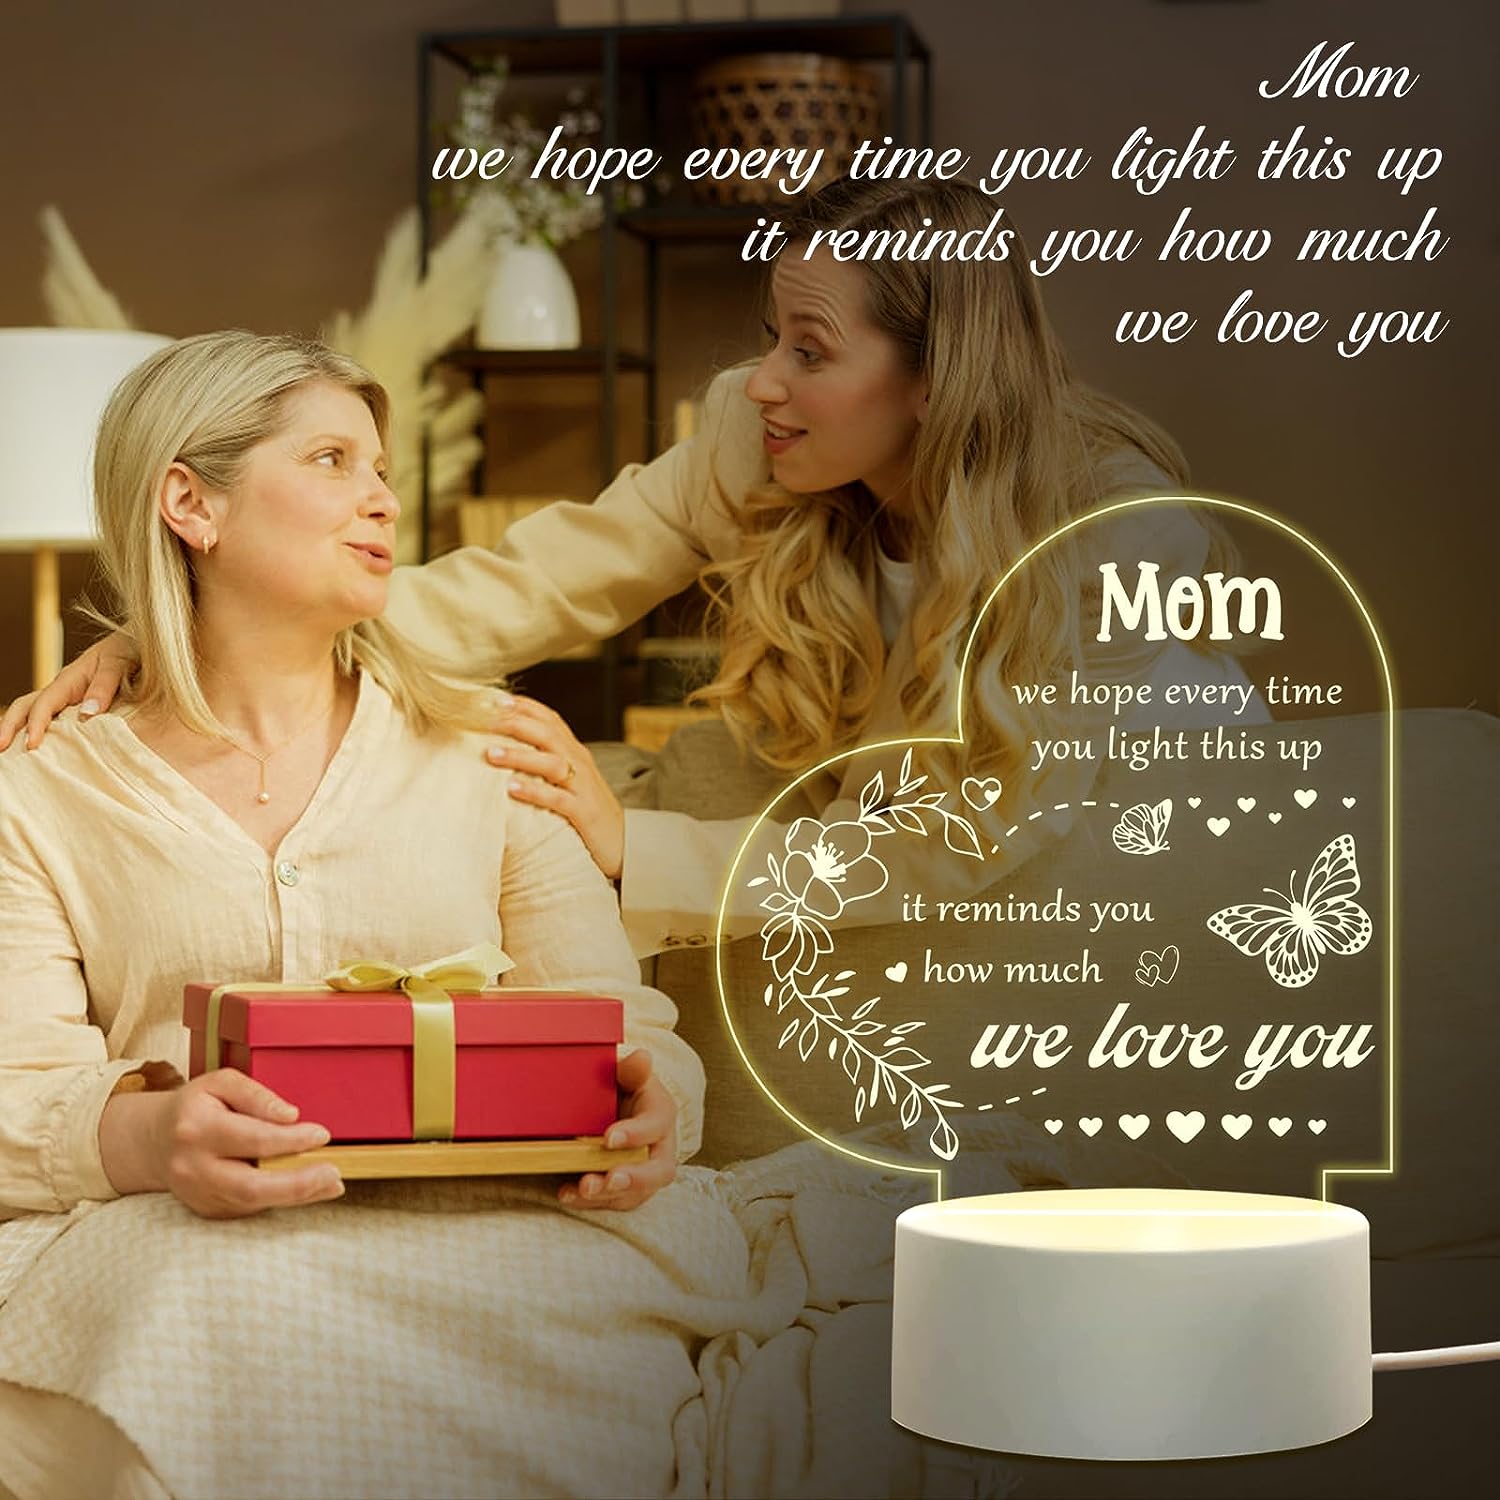 Christmas Gifts for Mom from Daughter Son- Mom Birthday Gifts Night Light